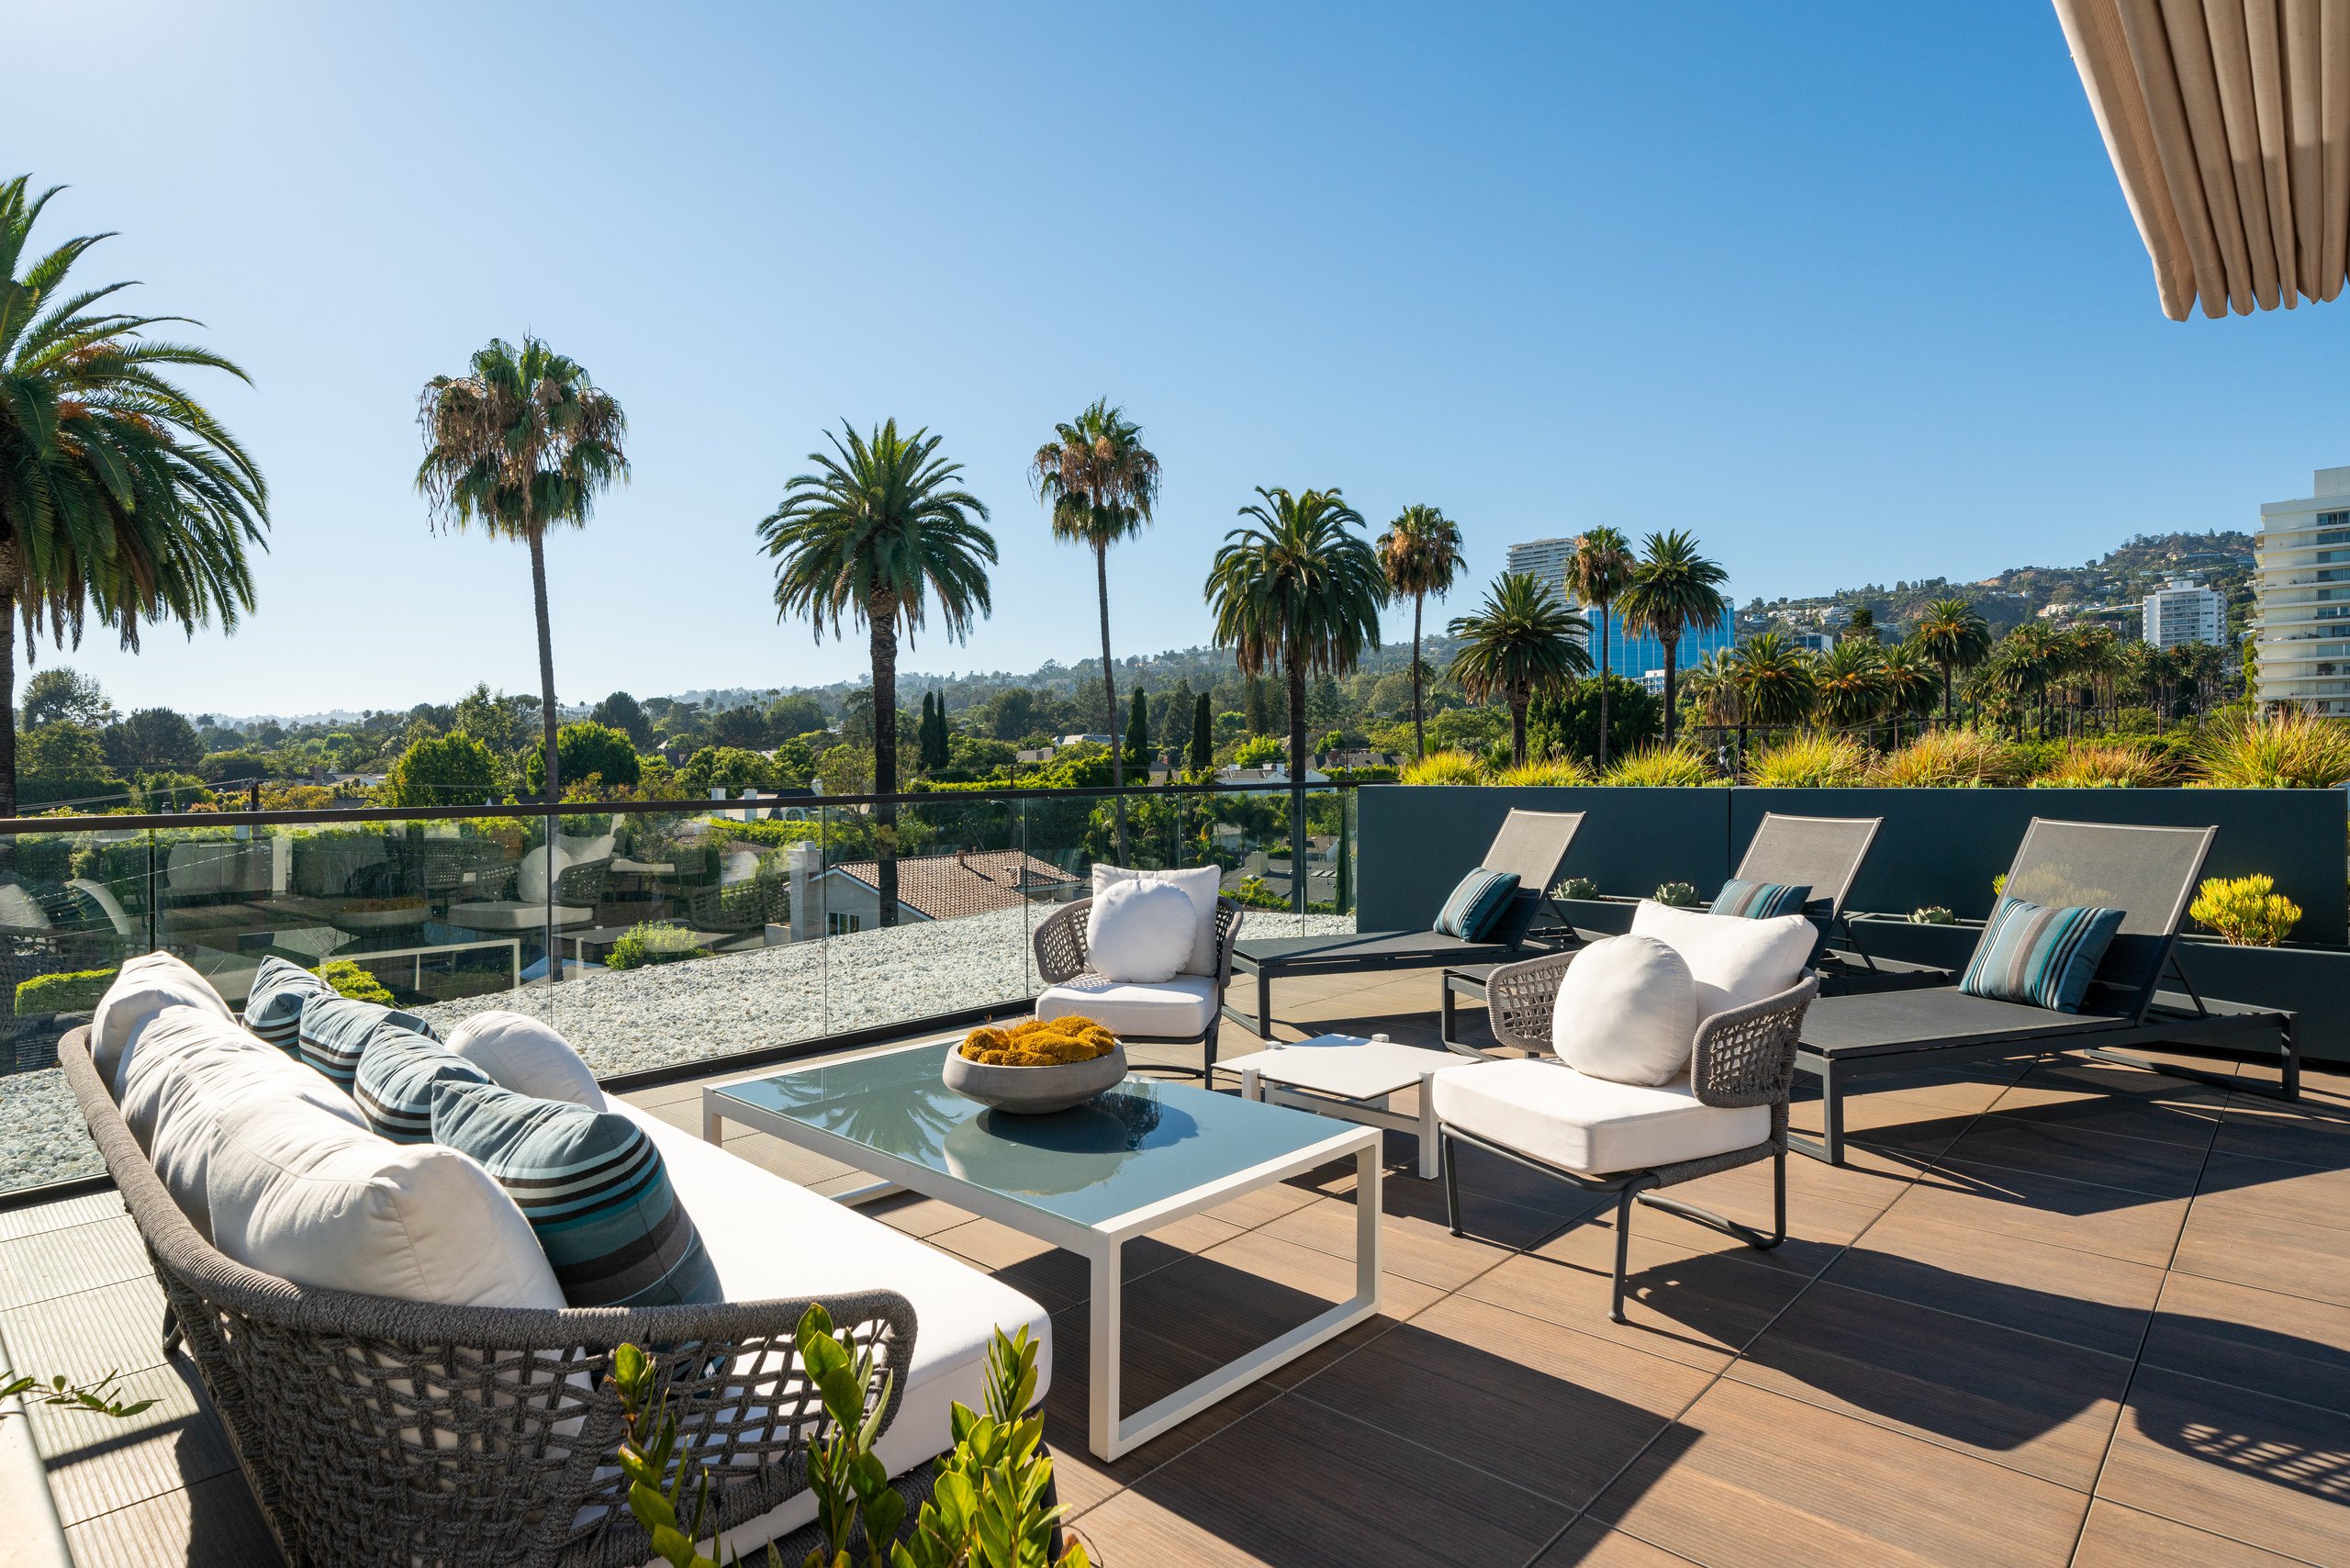 A photo of a rooftop terrace on a sunny day with vast, unobstructed views of Los Angeles